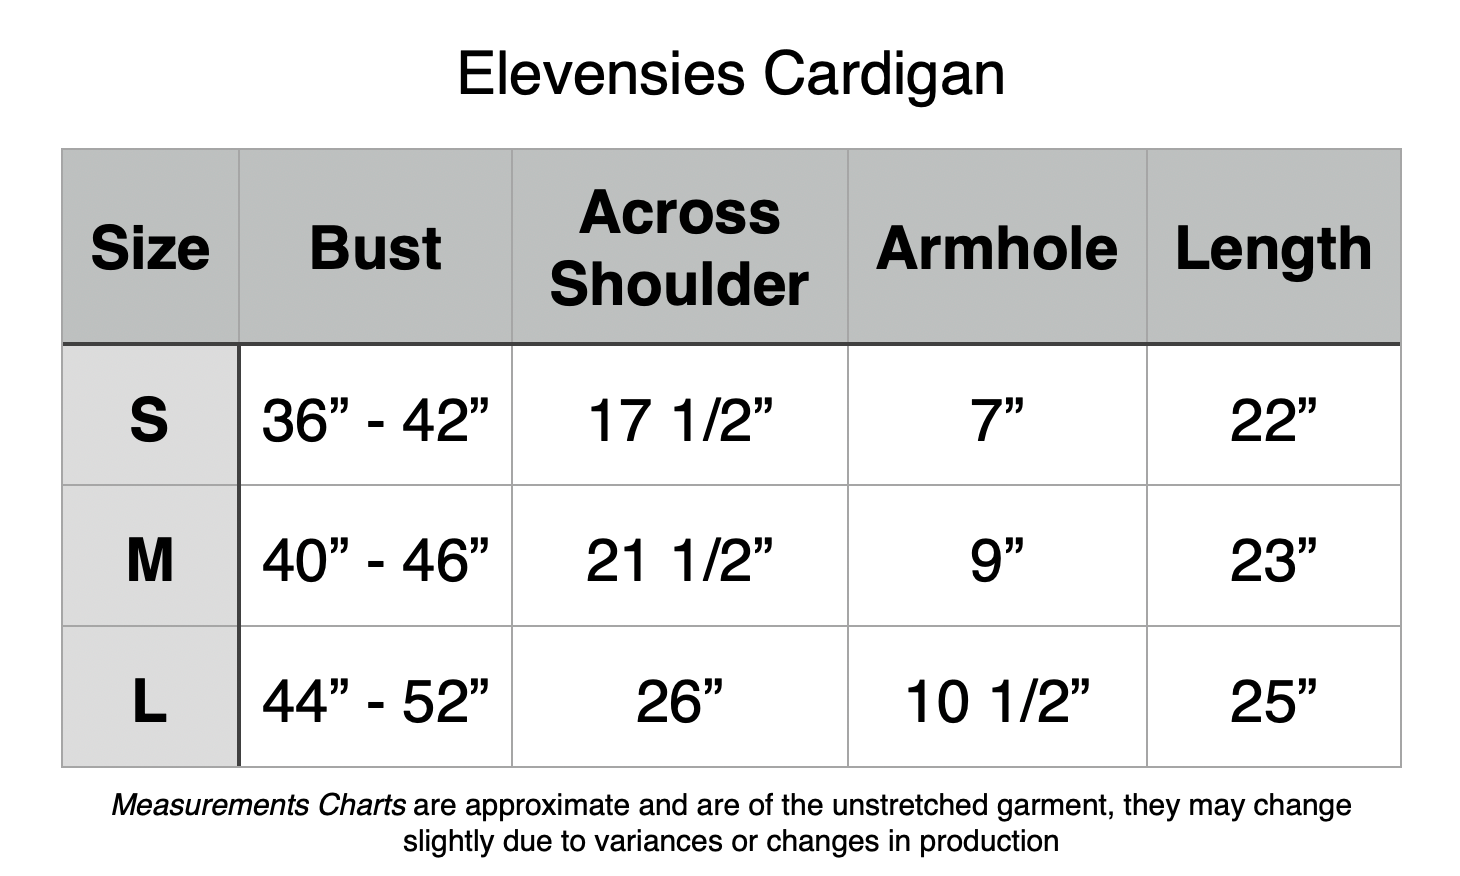 Elevensies Cardigan: Small - 36” to 42” Bust, 17.5” Across Shoulders. 7” Armhole, 22” Length. Medium - 40” to 46” Bust, 21.5” Across Shoulders. 9” Armhole, 23” Length. Medium - 44” to 52” Bust, 26” Across Shoulders. 10.5” Armhole, 25” Length.